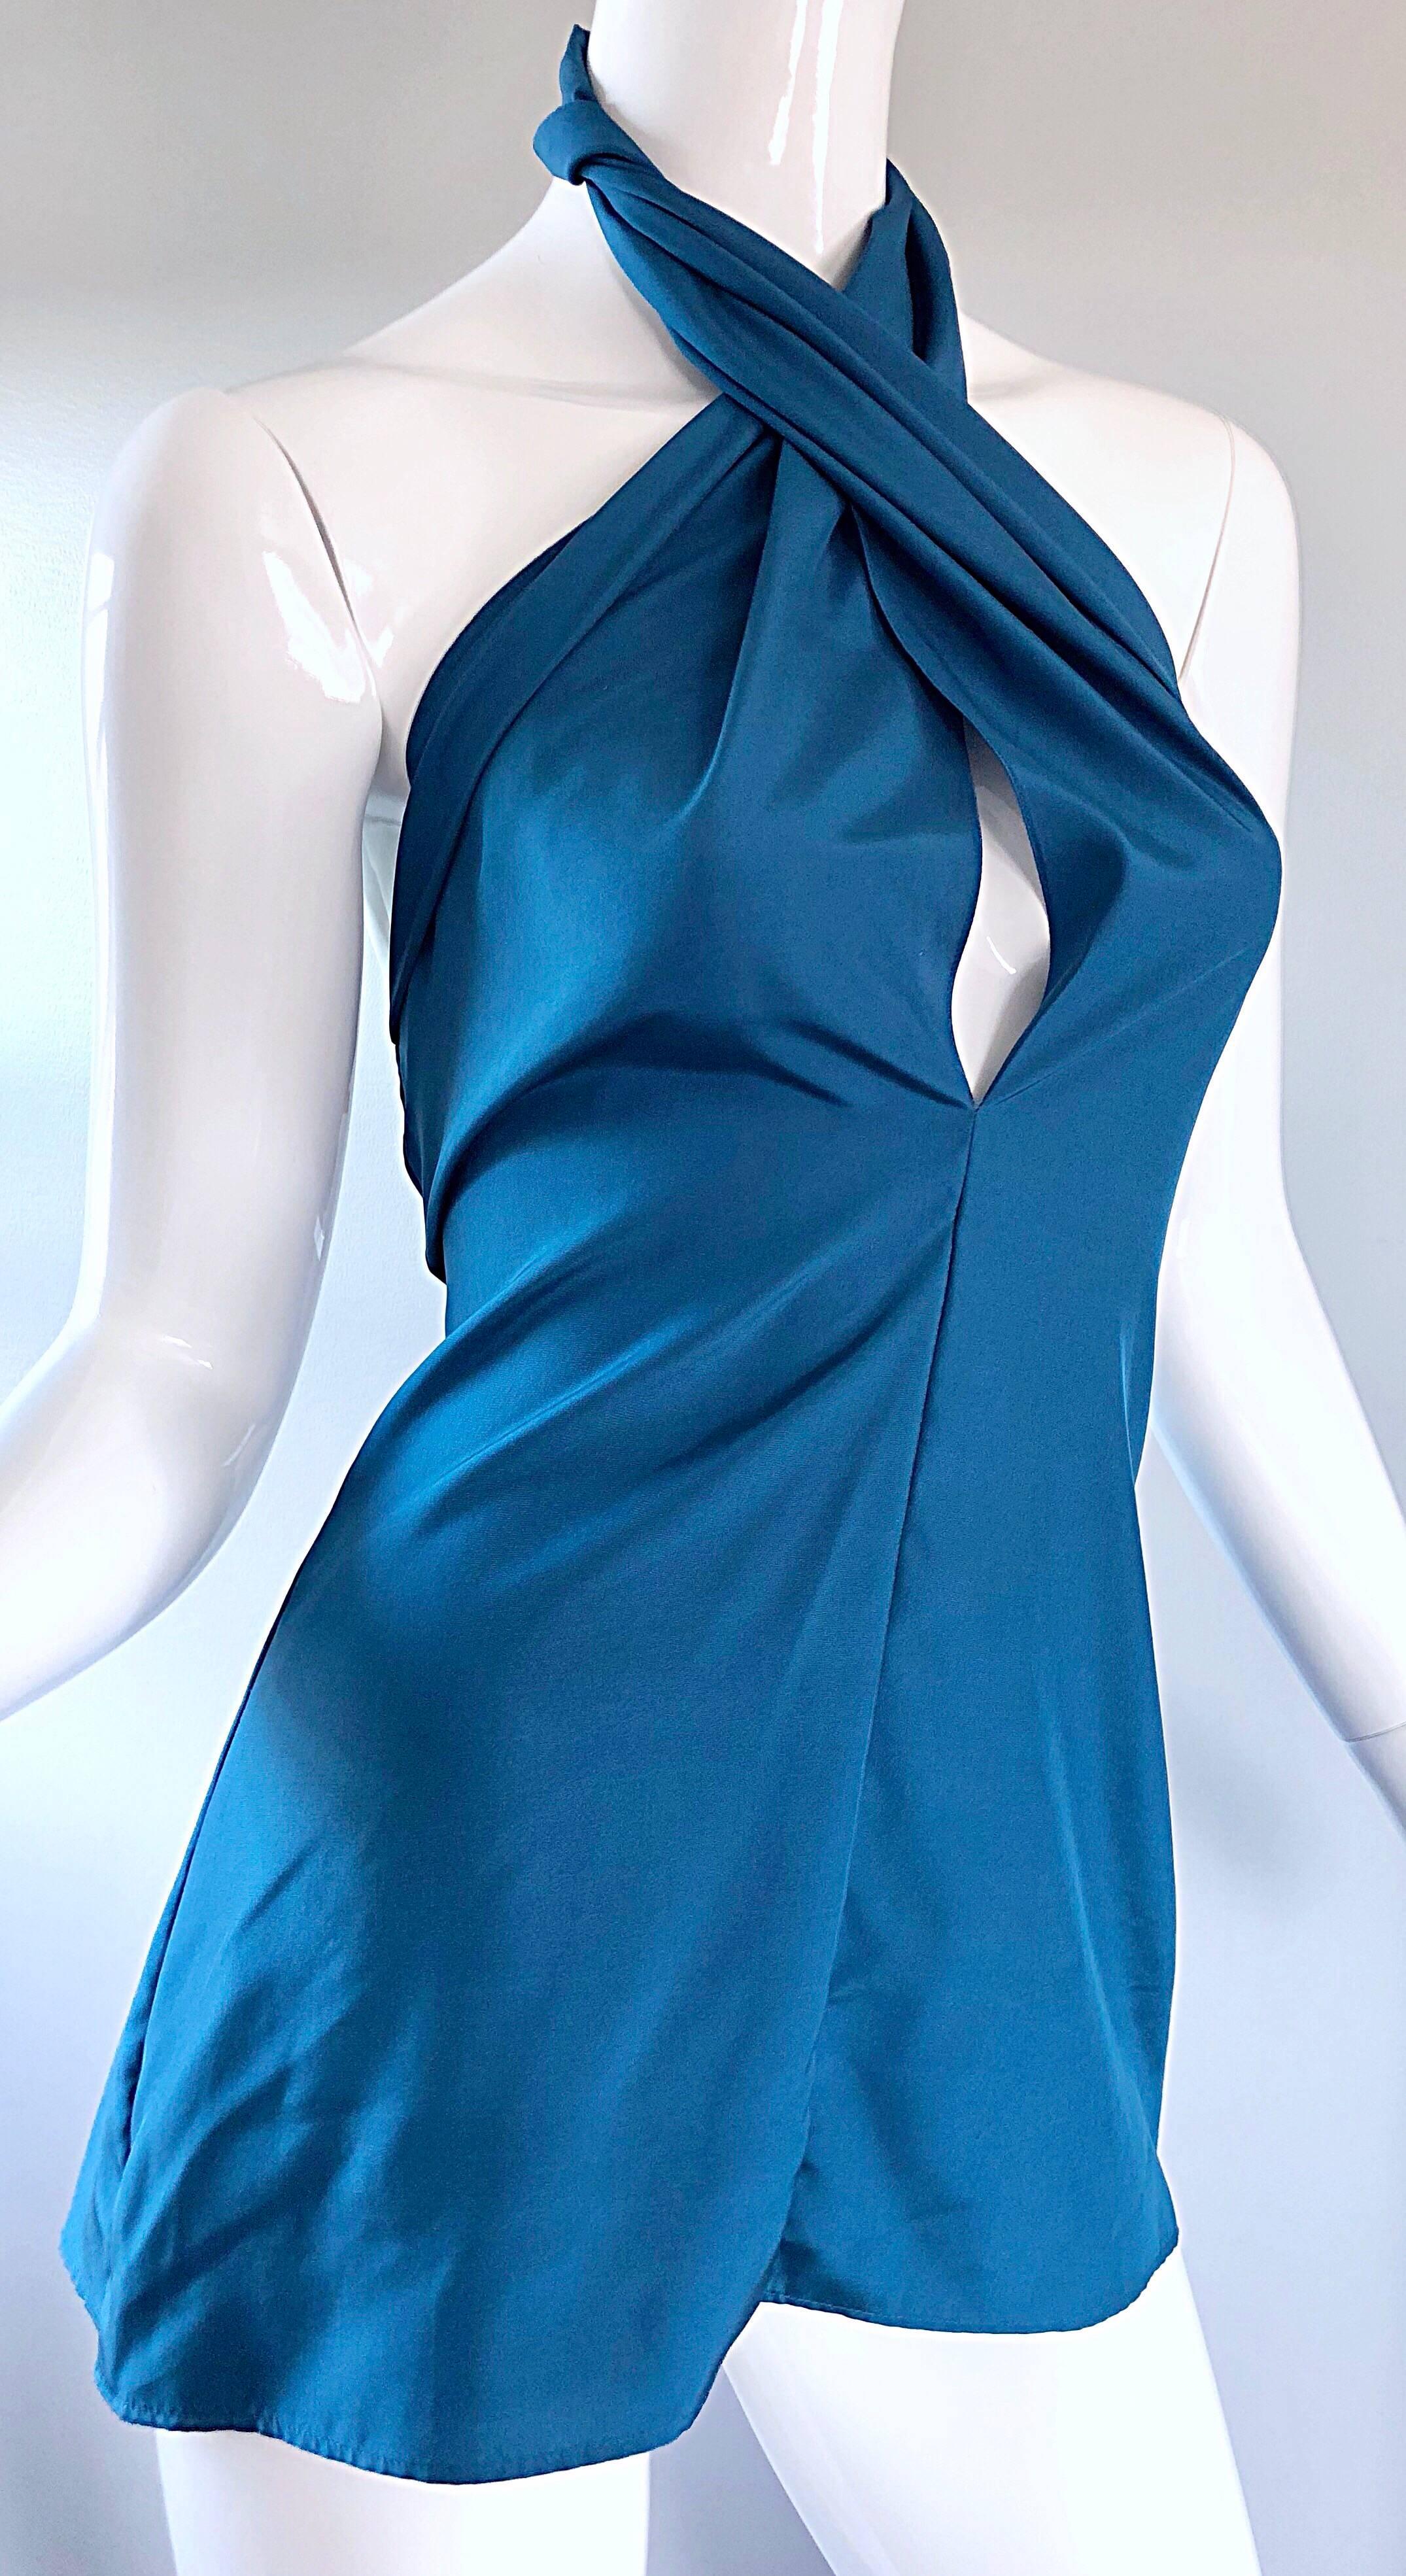 Yves Saint Laurent YSL Rive Gauche New Blue Plunging Silk Halter Top For Sale 1